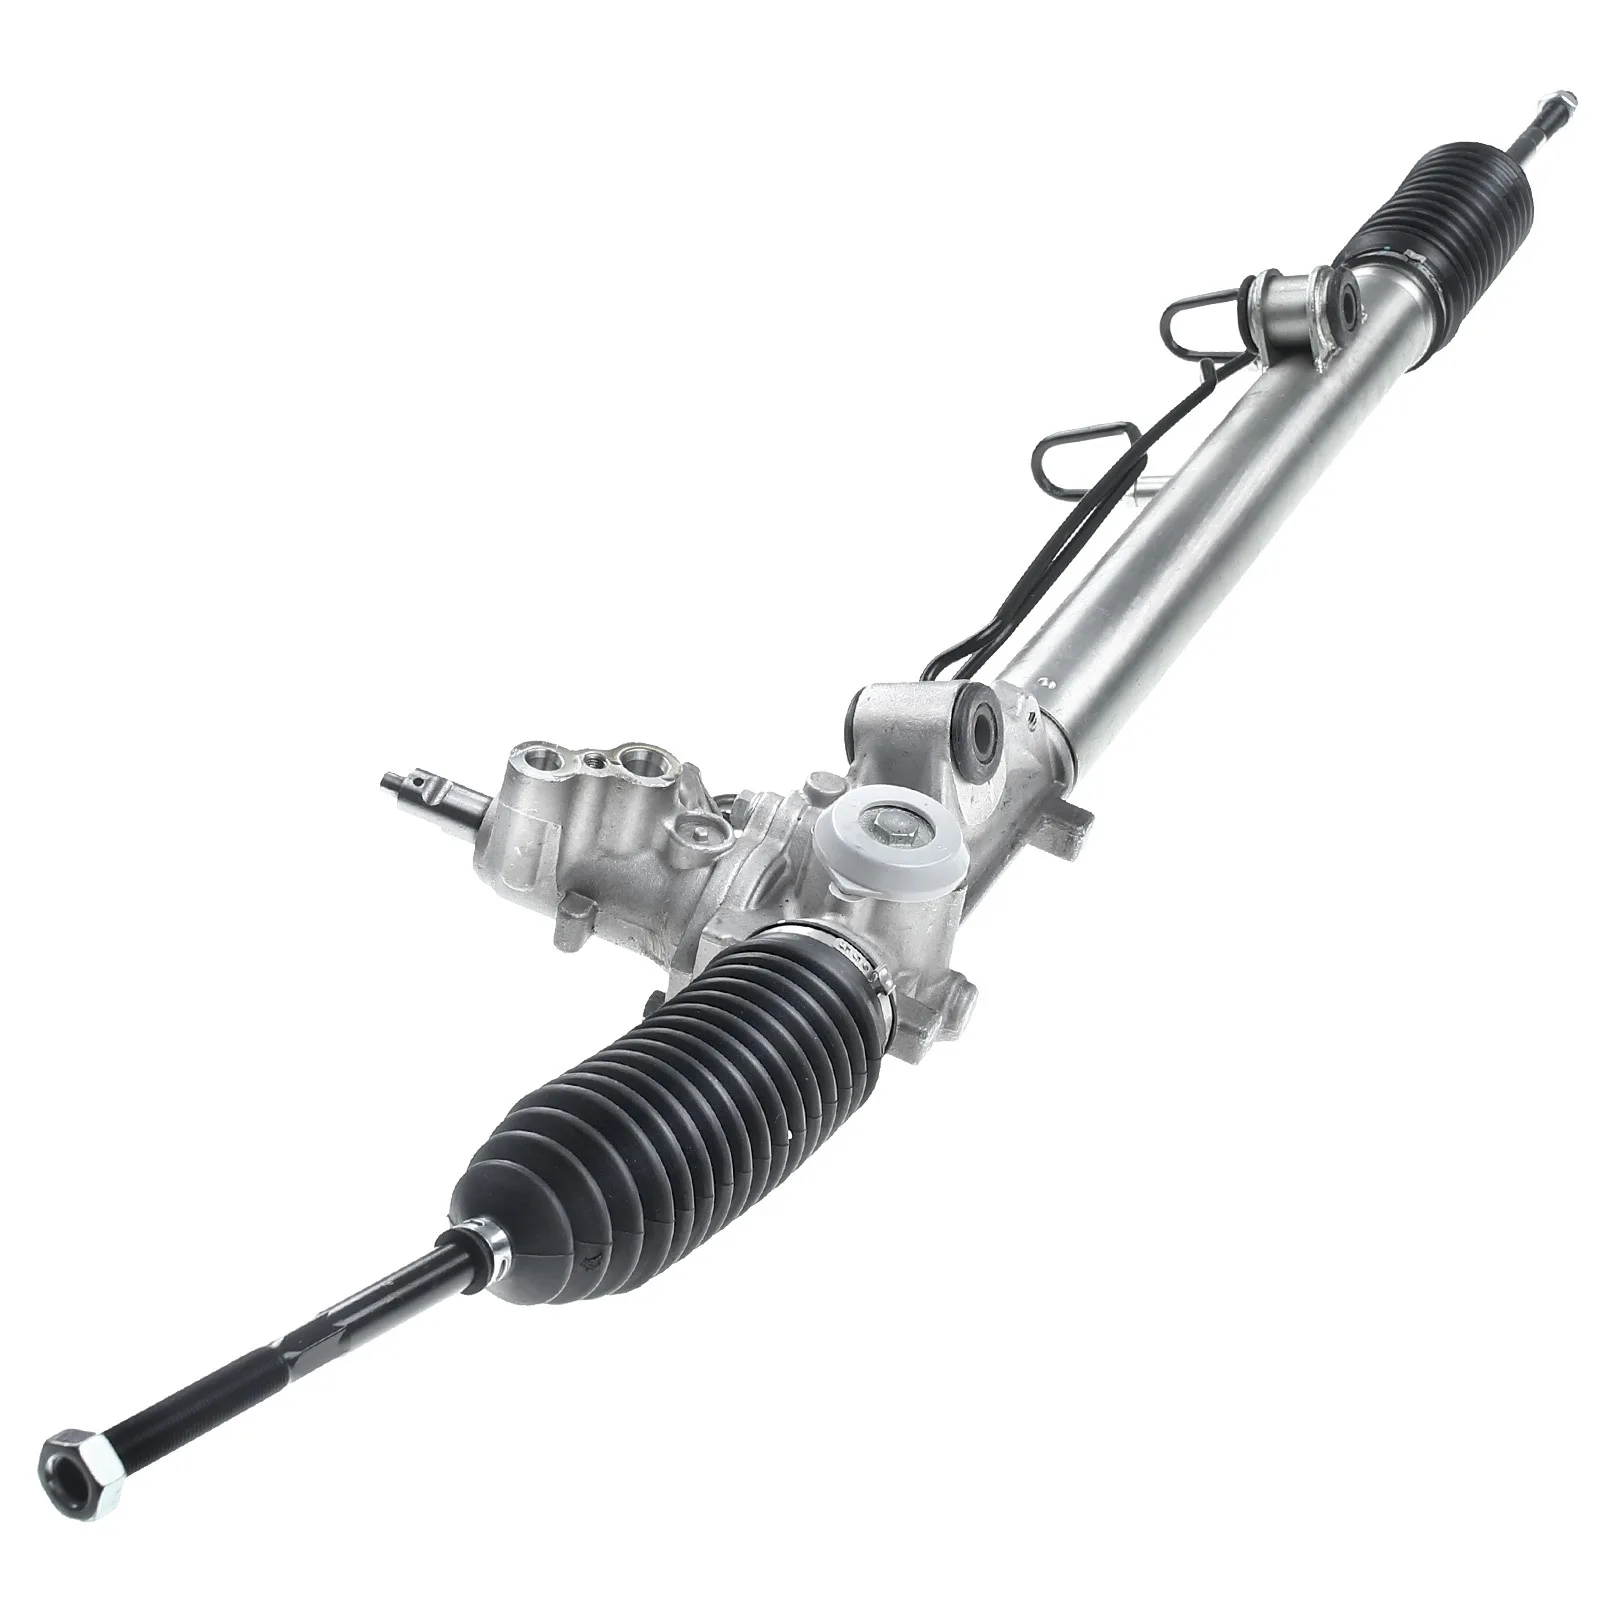 

In-stock CN US Power Steering Rack Pinion Assembly for Ford Flex 09-12 Taurus Lincoln Mercury 8A8Z3504C